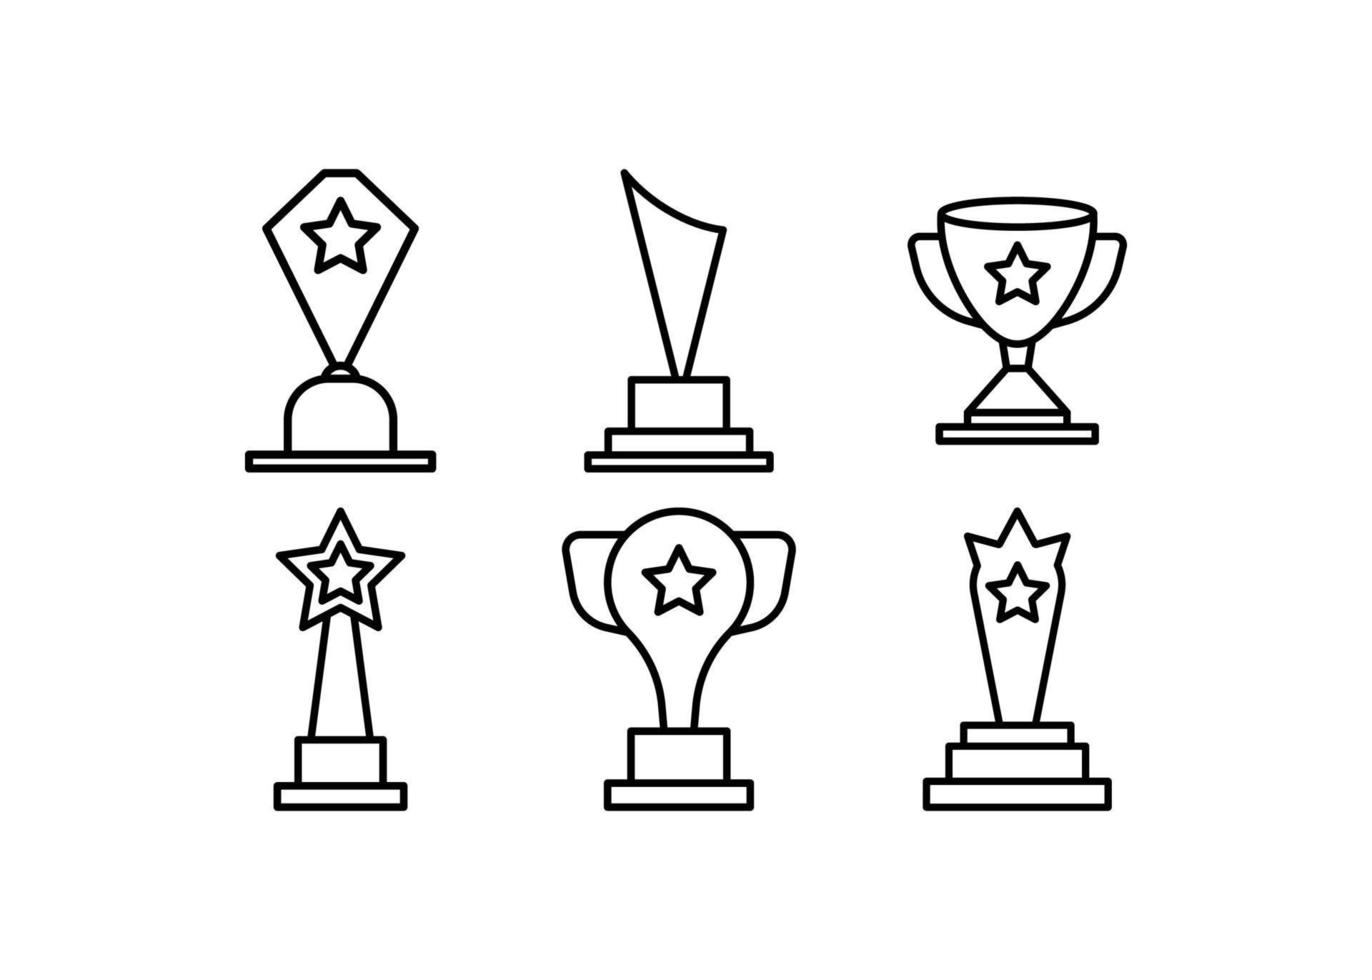 Trophy cup icon design template vector isolated illustration